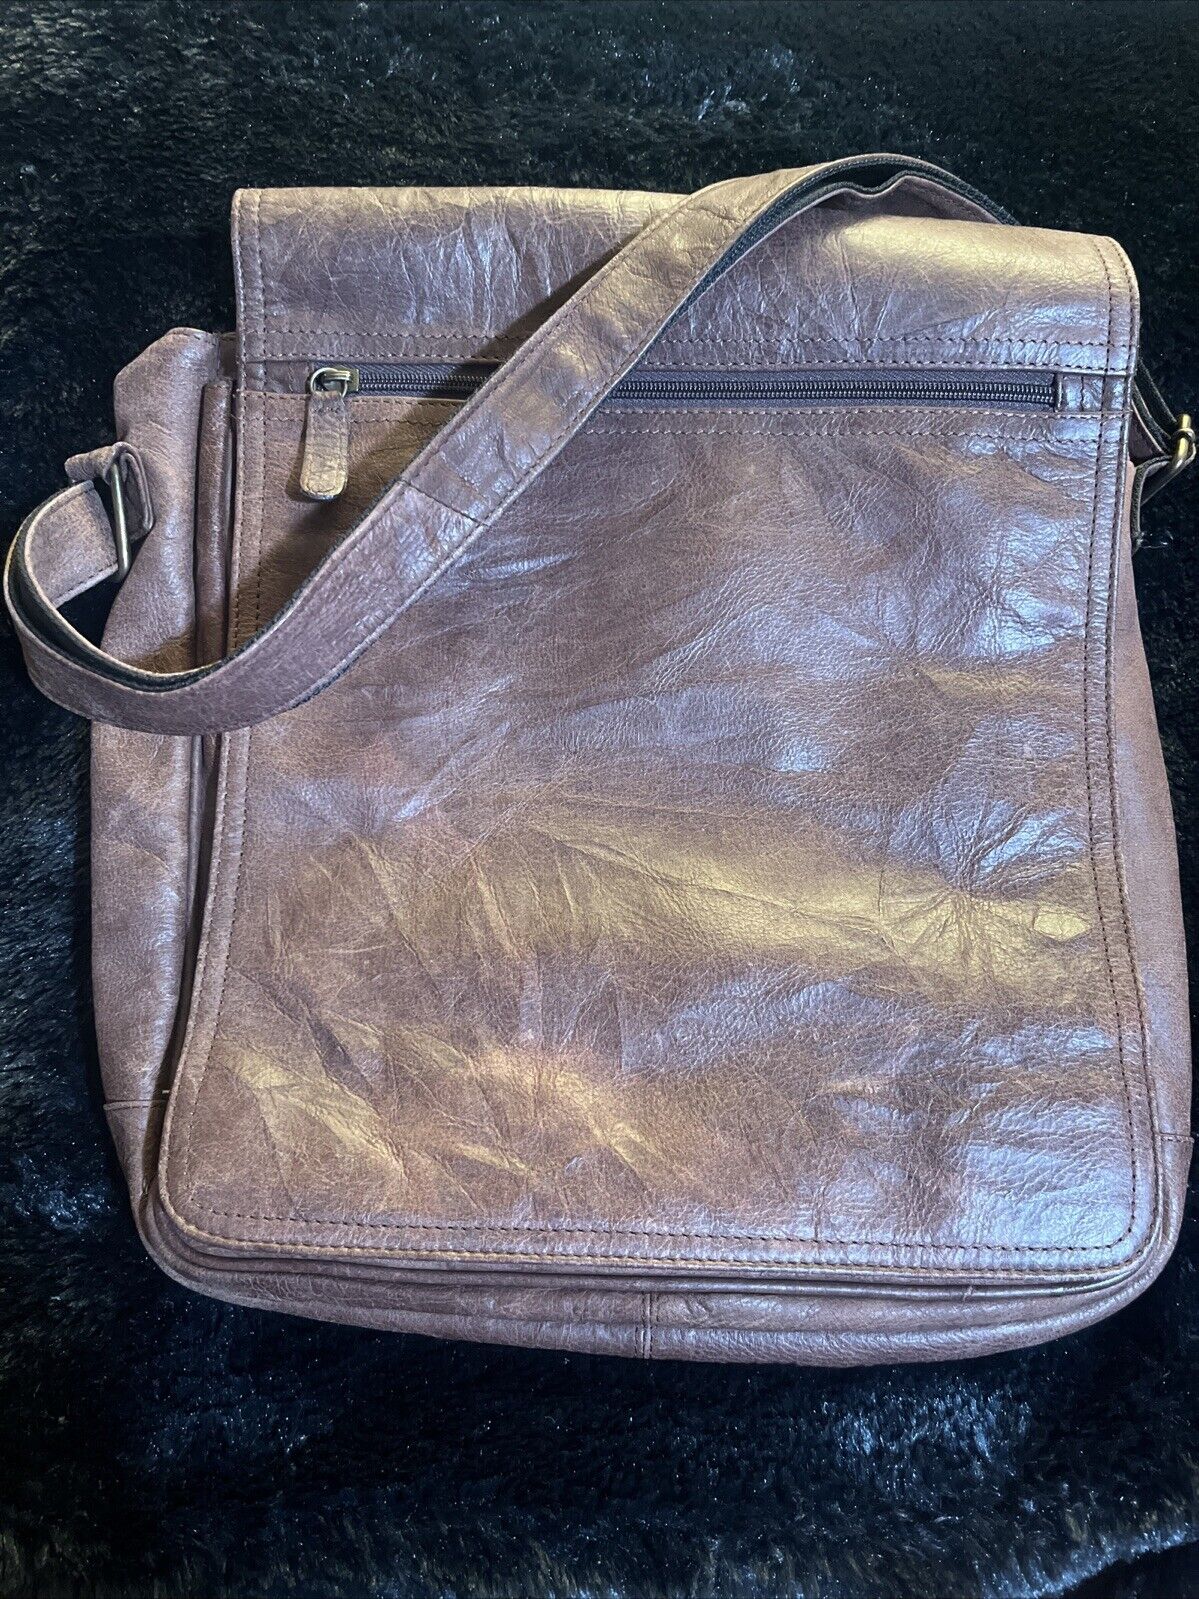 Wilsons Leather Crossbody Messenger Bag Carry On School College Business Unisex